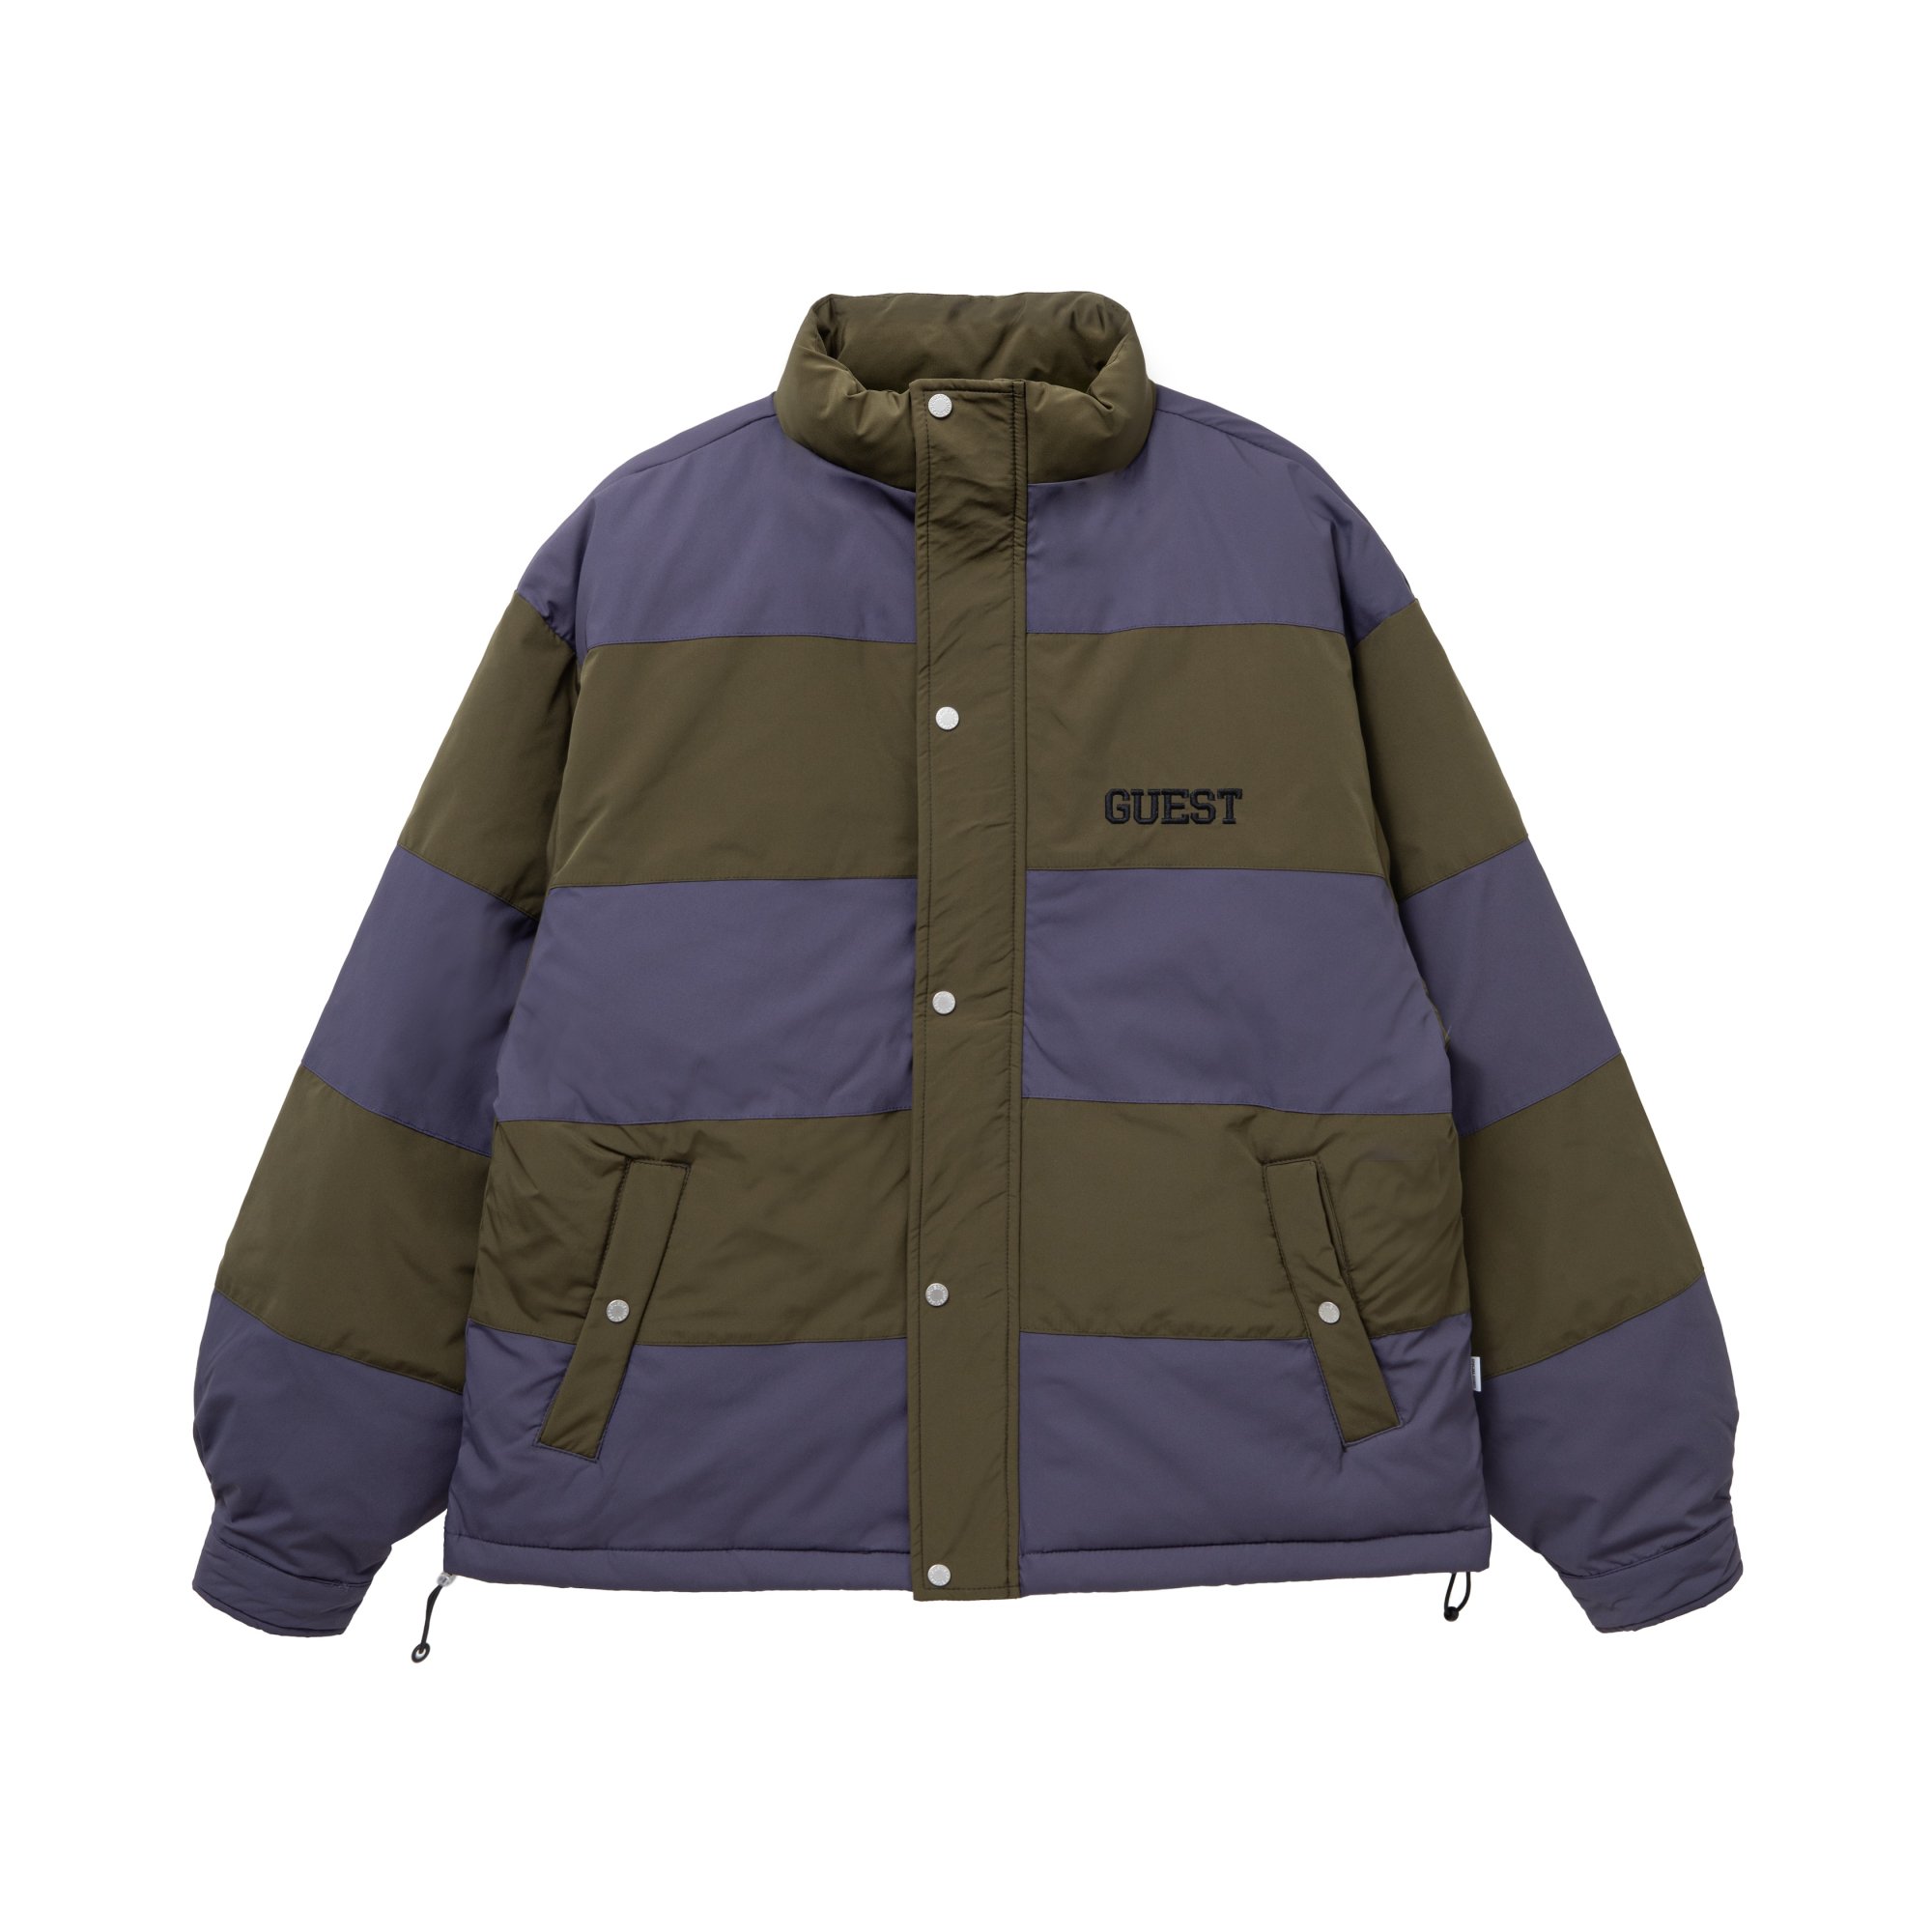 SPECIAL GUEST<br>SG 2tone inner cotton jacket<br>